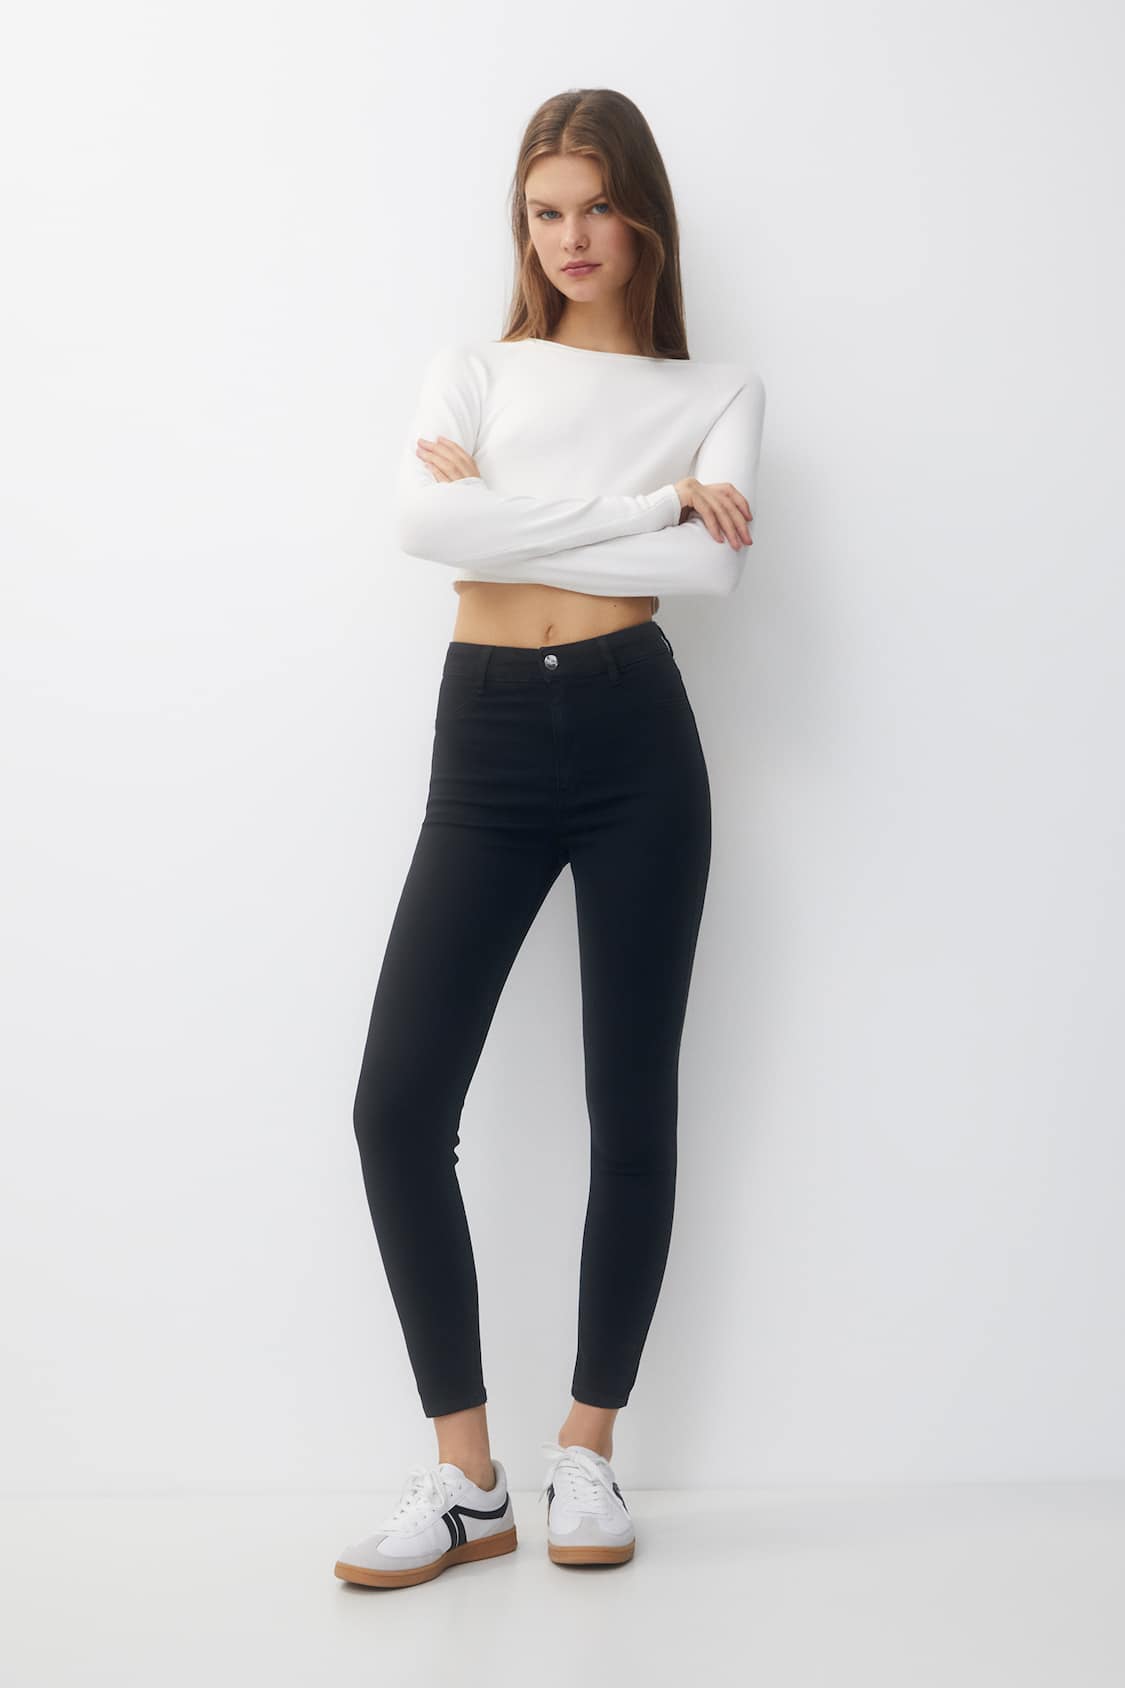 Pull&Bear seamless high waisted legging shorts co-ord in grey